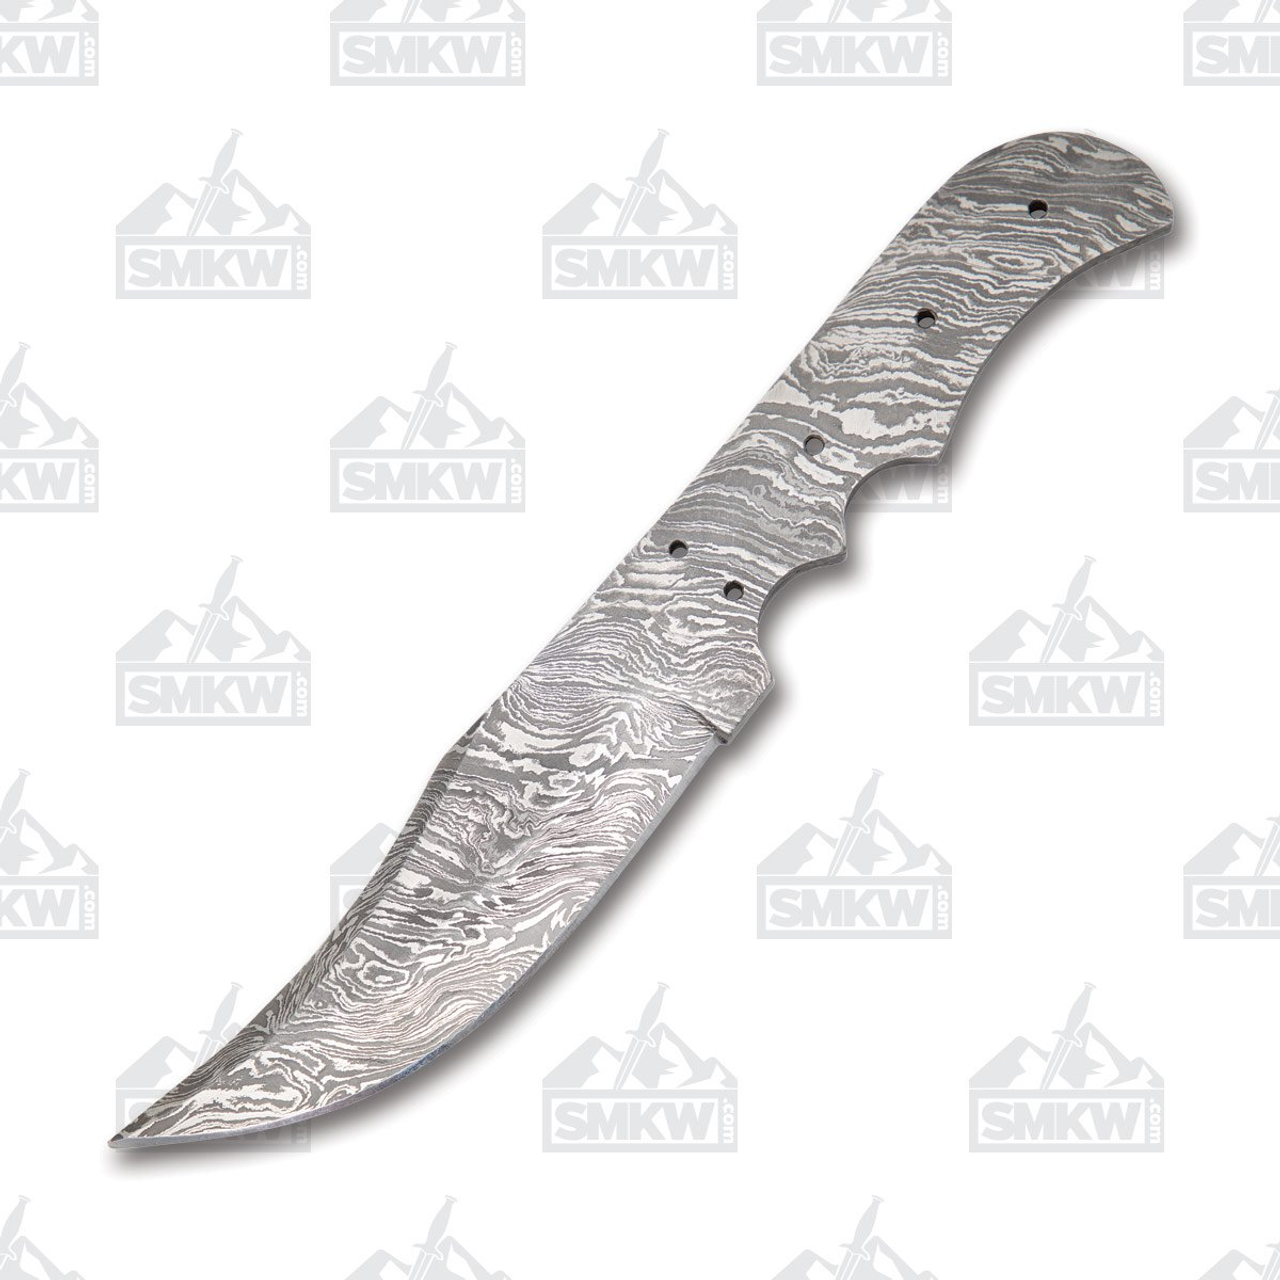 Coloring Damascus Knives: How it's Done – Grindworx – Blog